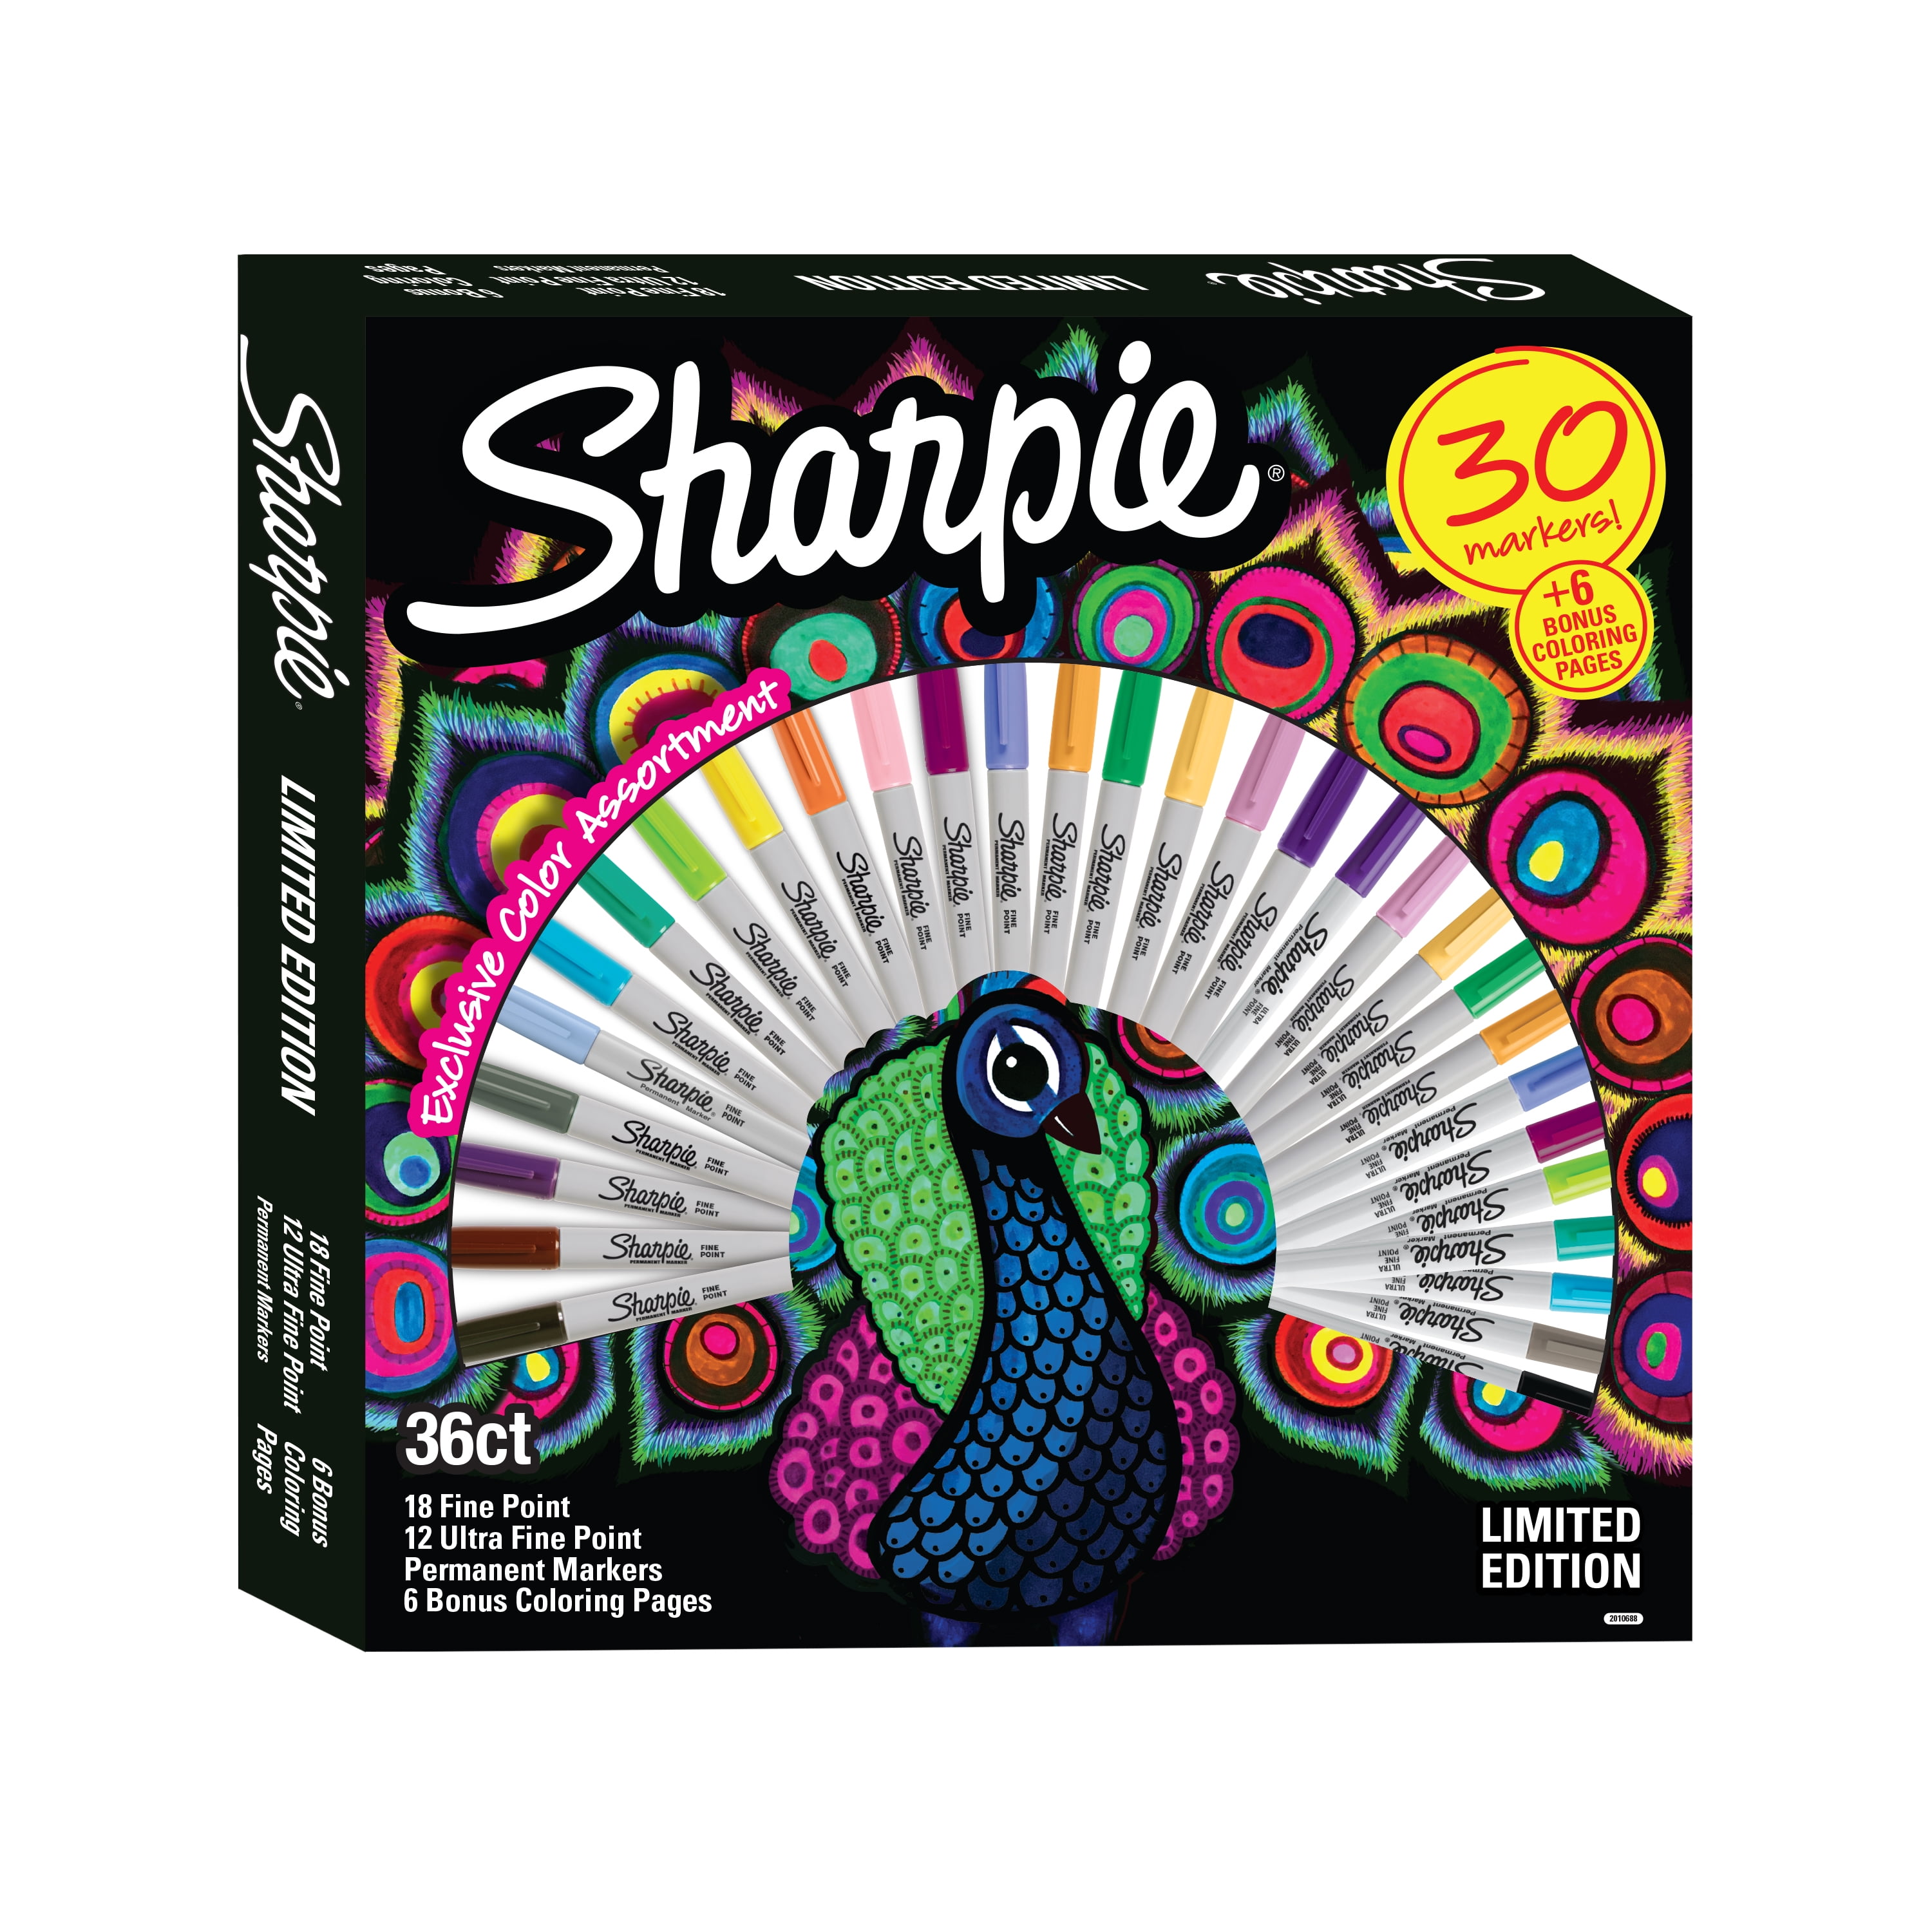 Adult Coloring Book Gift Set With Sharpie & Papermate Pens Limited Edition  30PCs